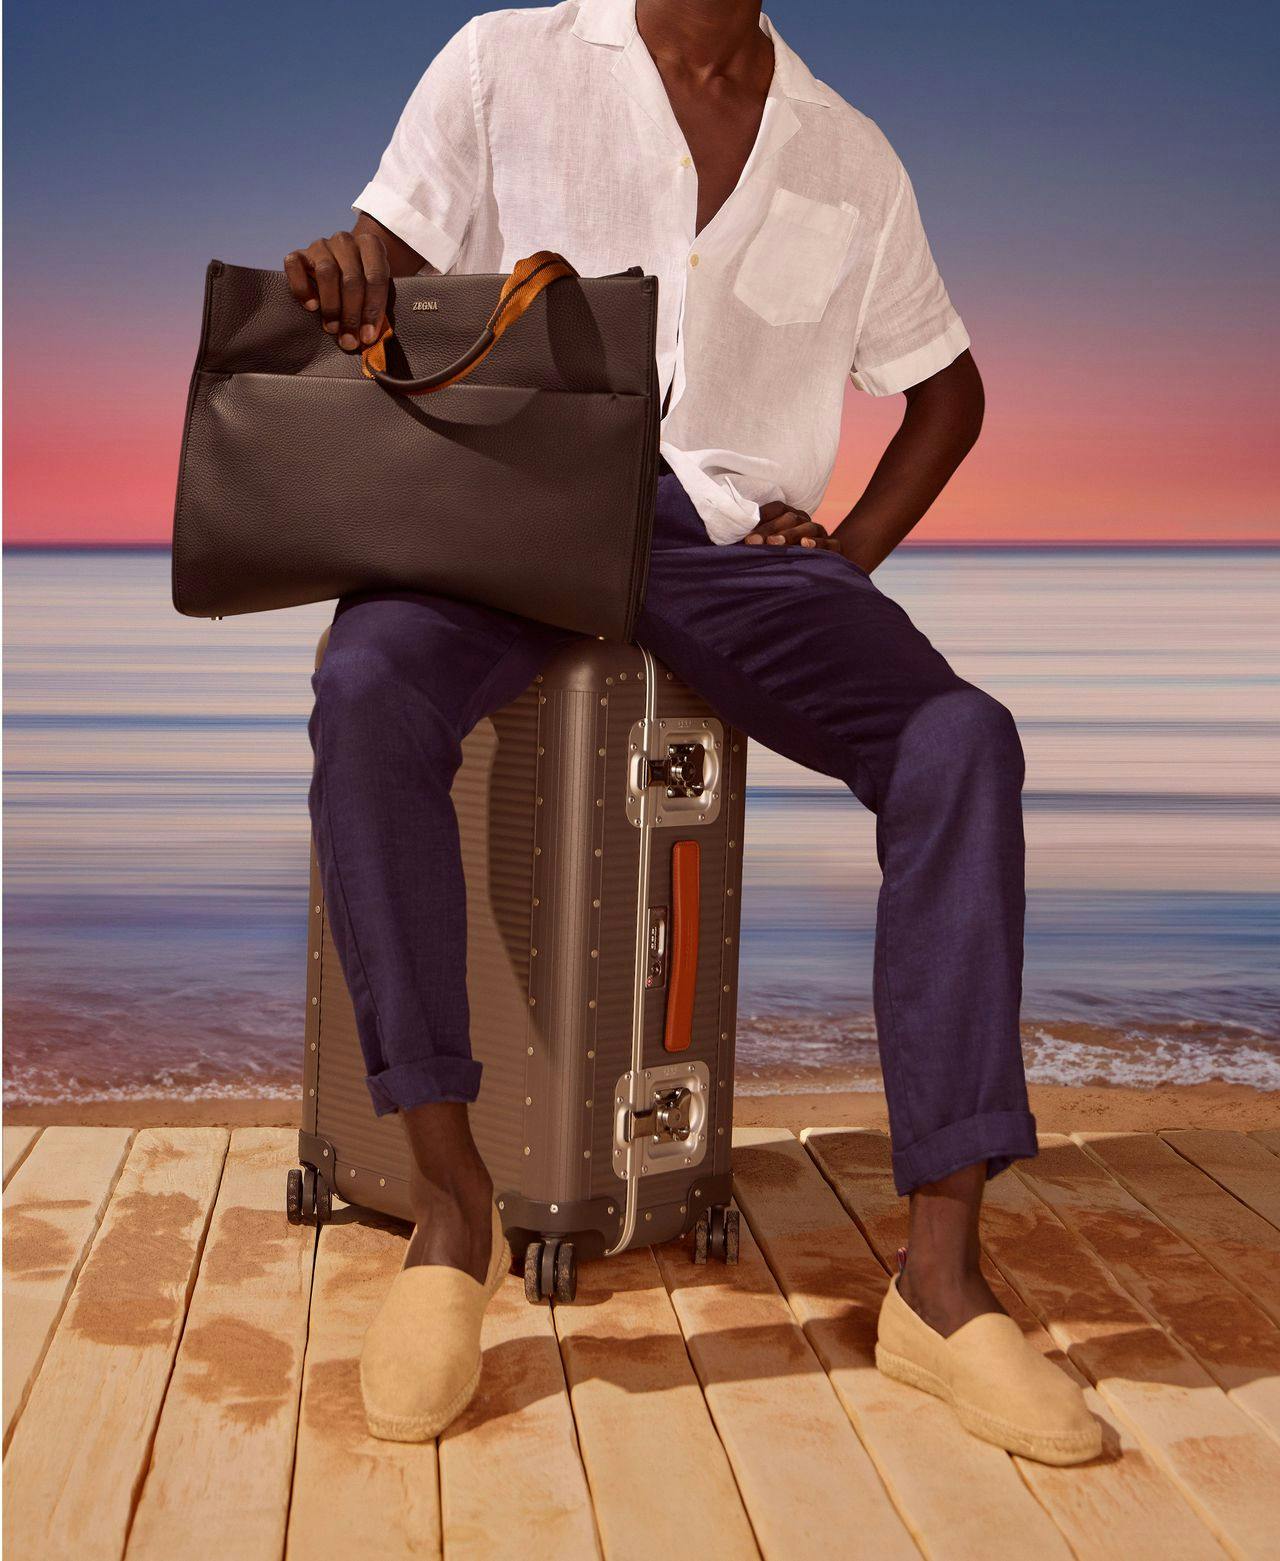 male model sitting infront of ocean on luggage wearing chinos and sport shirt holding a tote bag